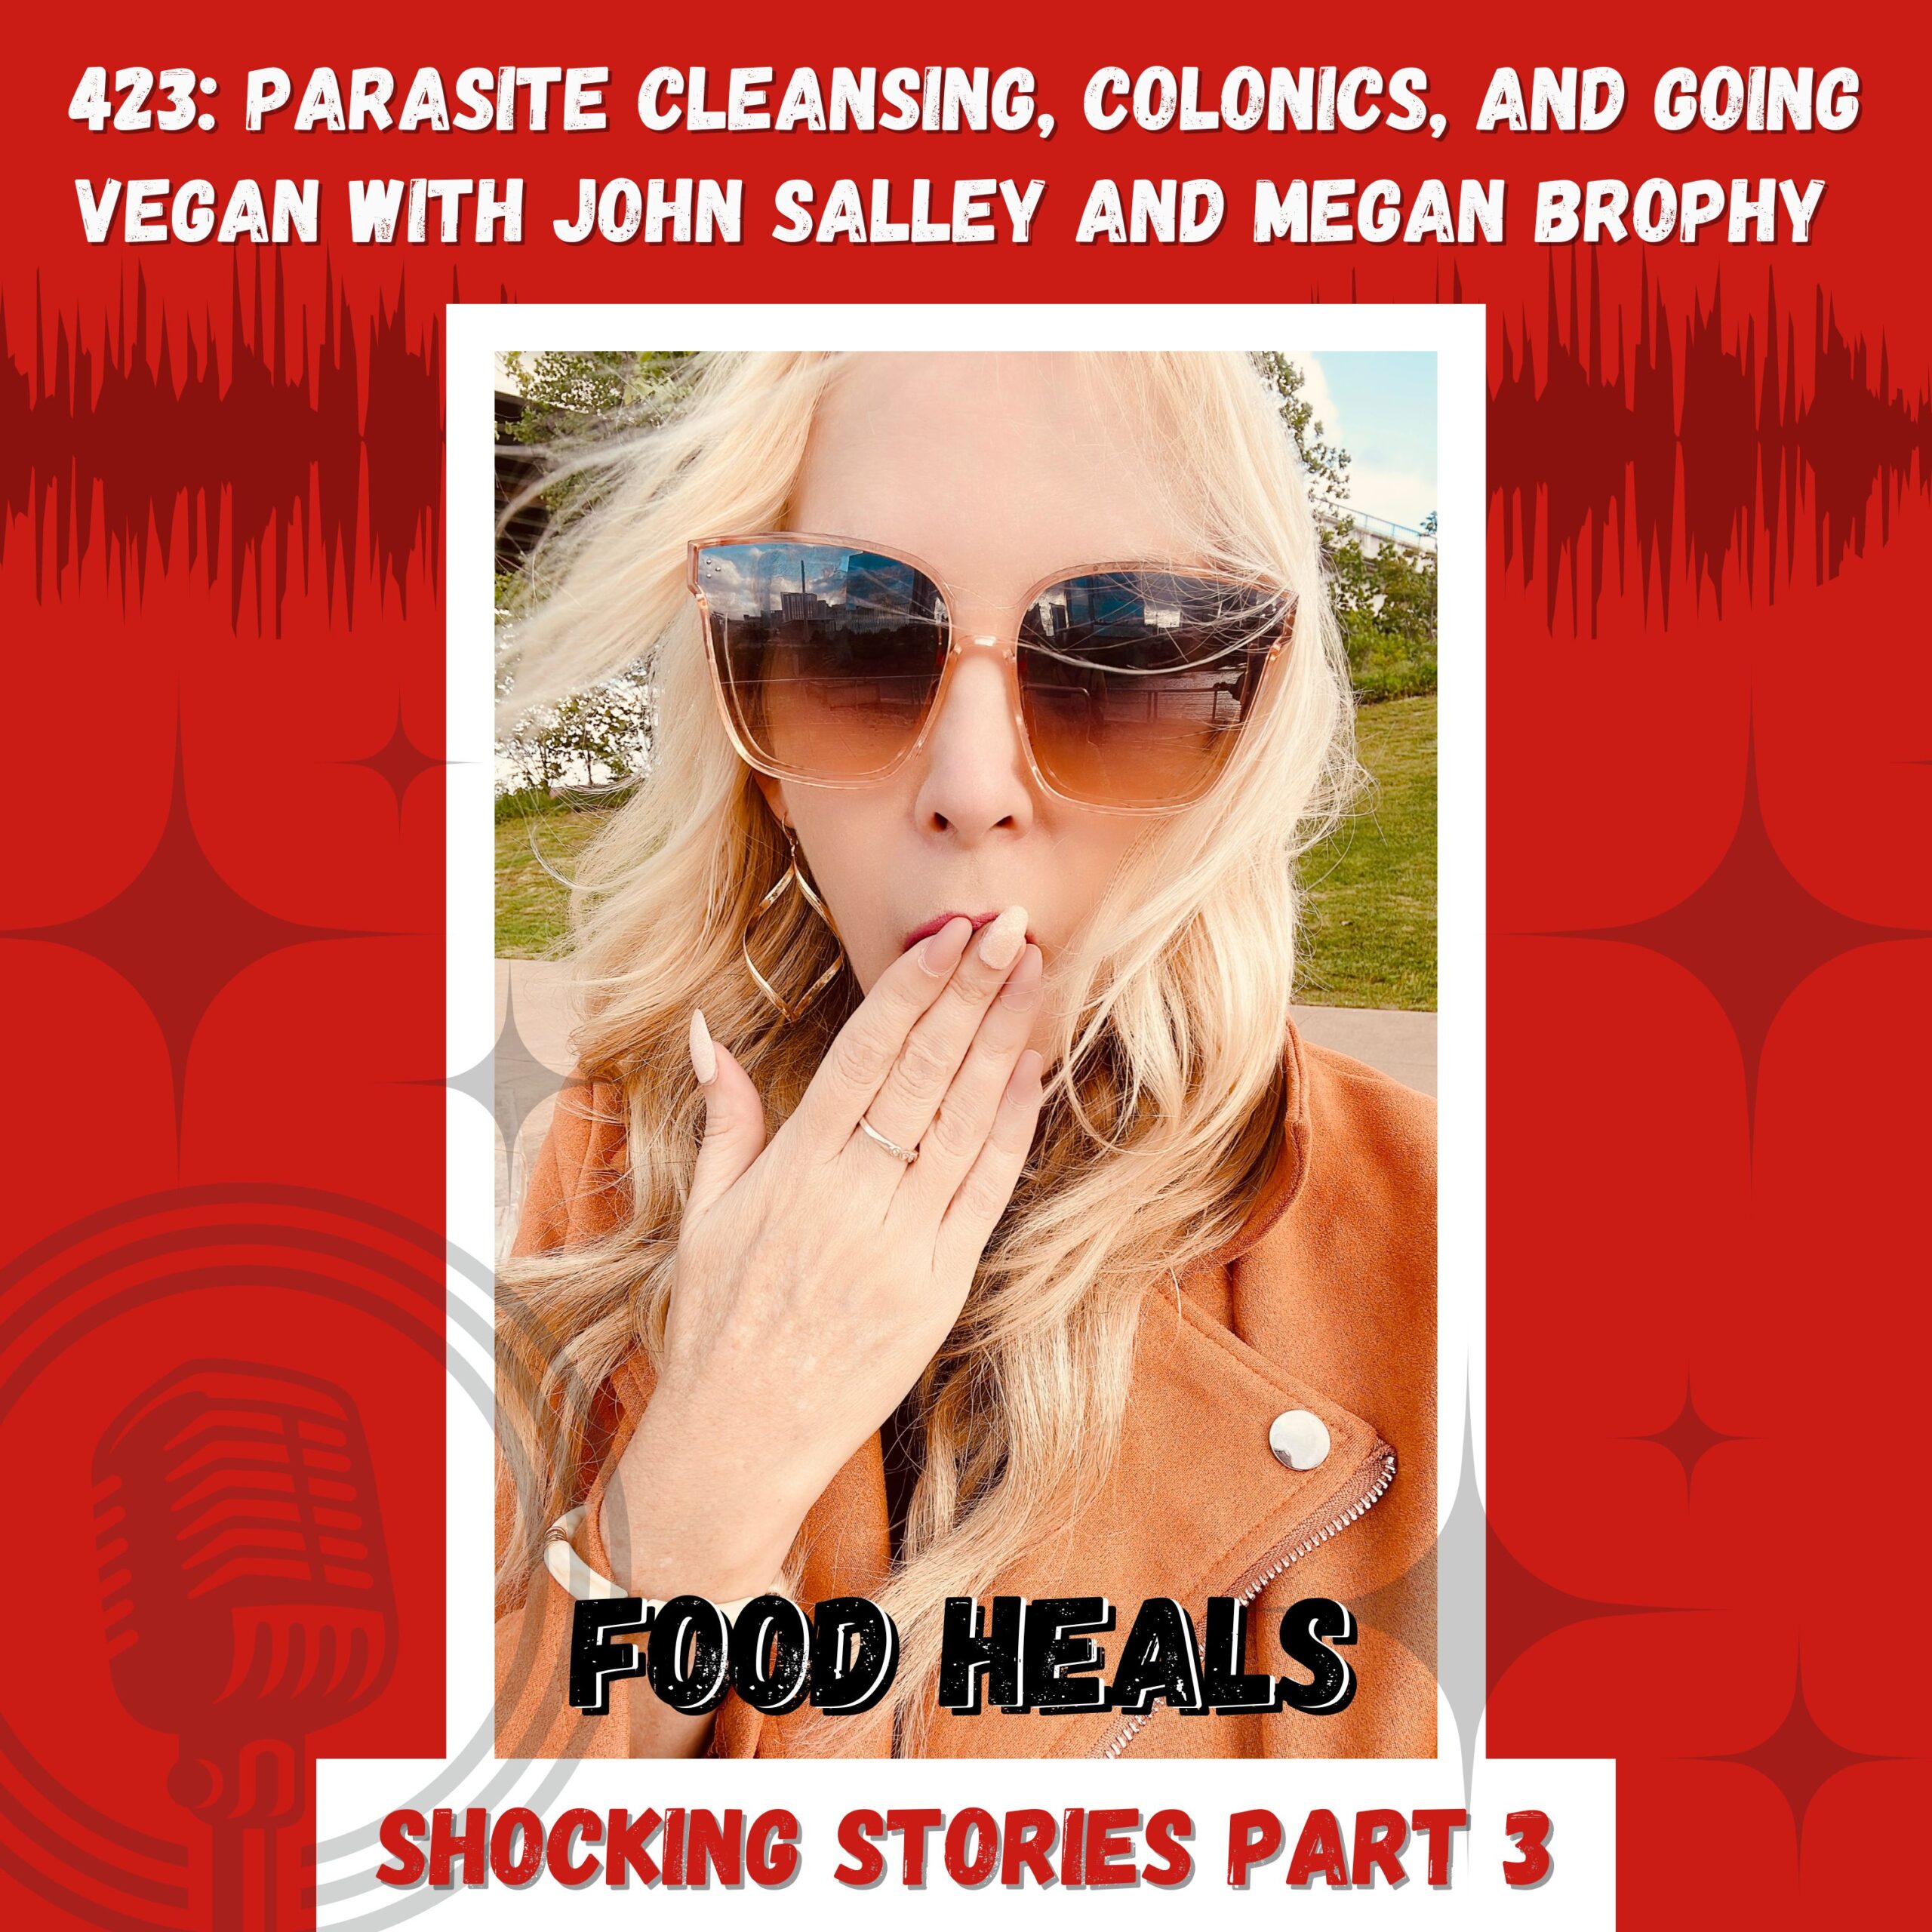 Parasite Cleansing, Colonics, and Going Vegan with John Salley and Megan Brophy (The Most Shocking Stories We’ve Ever Heard on Food Heals - Part 3)